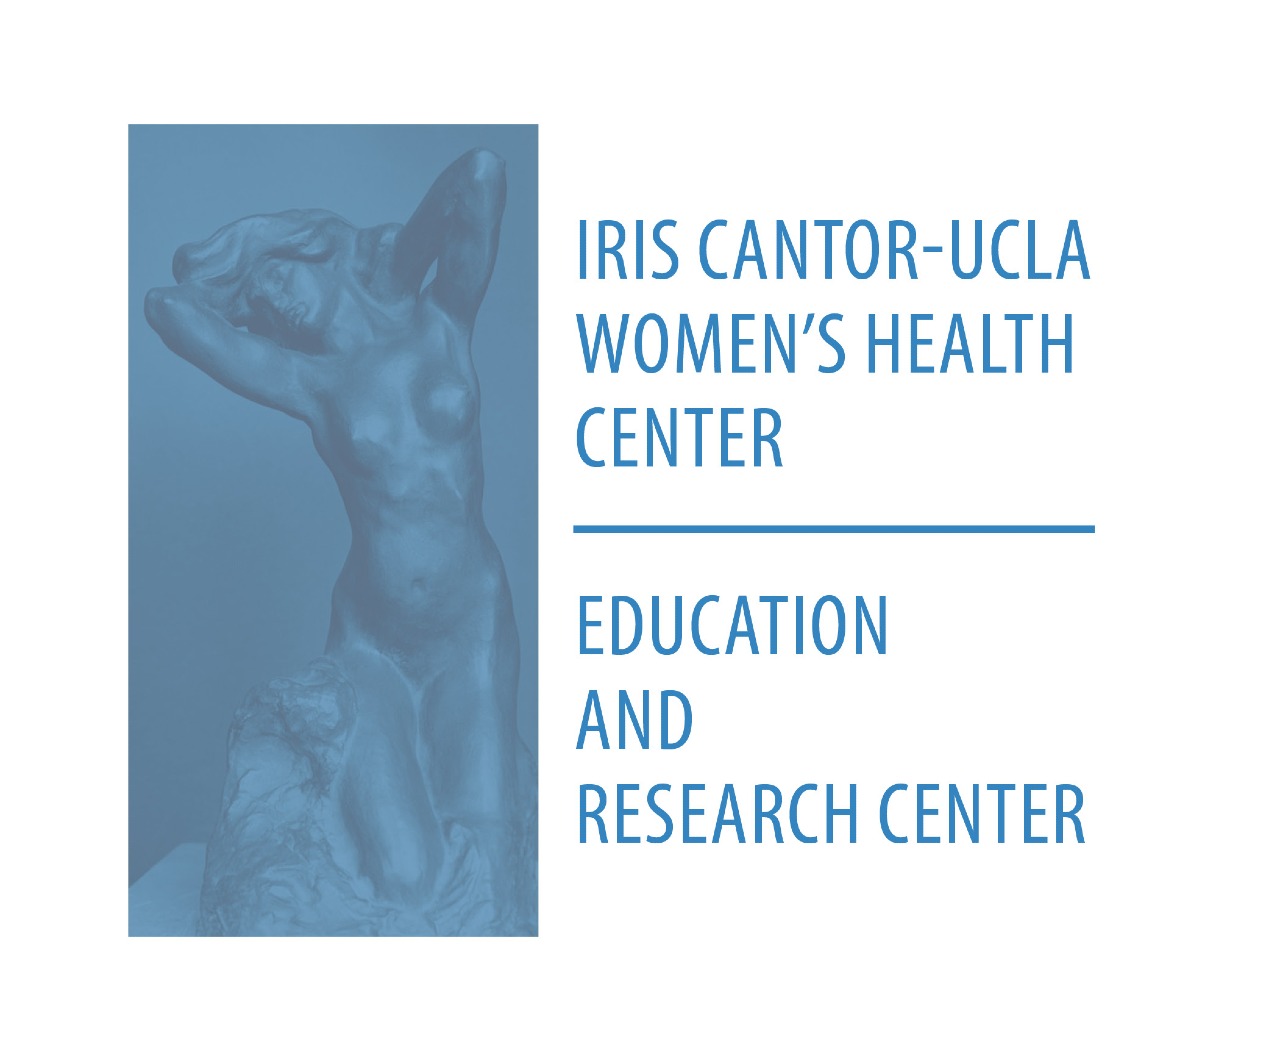 *ZOOM meeting link will be sent upon registration* Kara Justeson Iris Cantor-UCLA Women's Health Education & Research Center 1100 Glendon Ave, Suite 800 Los Angeles, CA 90024 kjusteson@mednet.ucla.edu